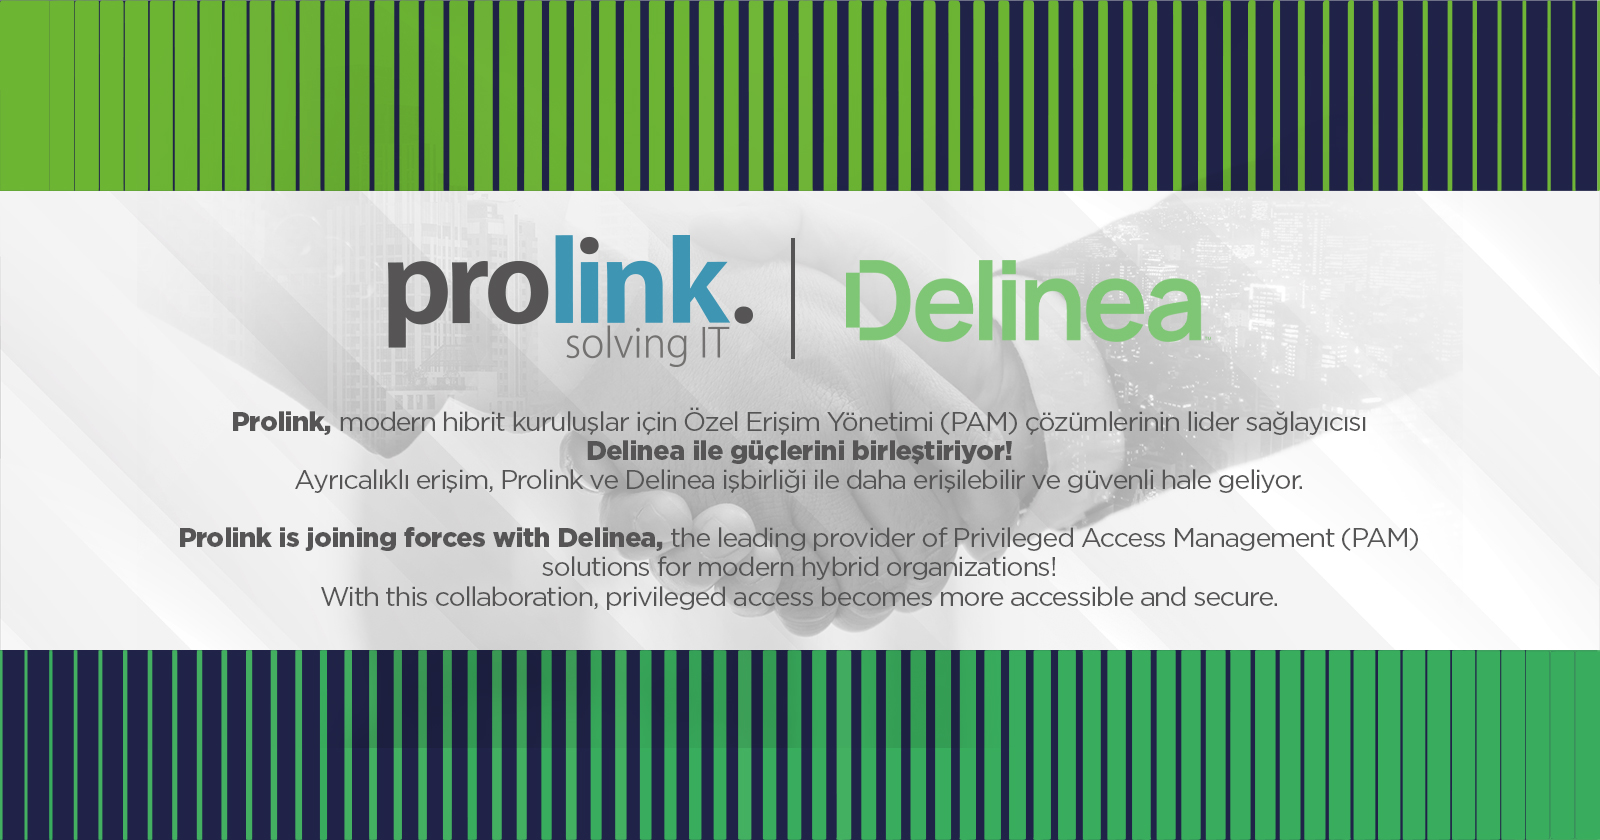 Prolink is Joining Forces with Delinea